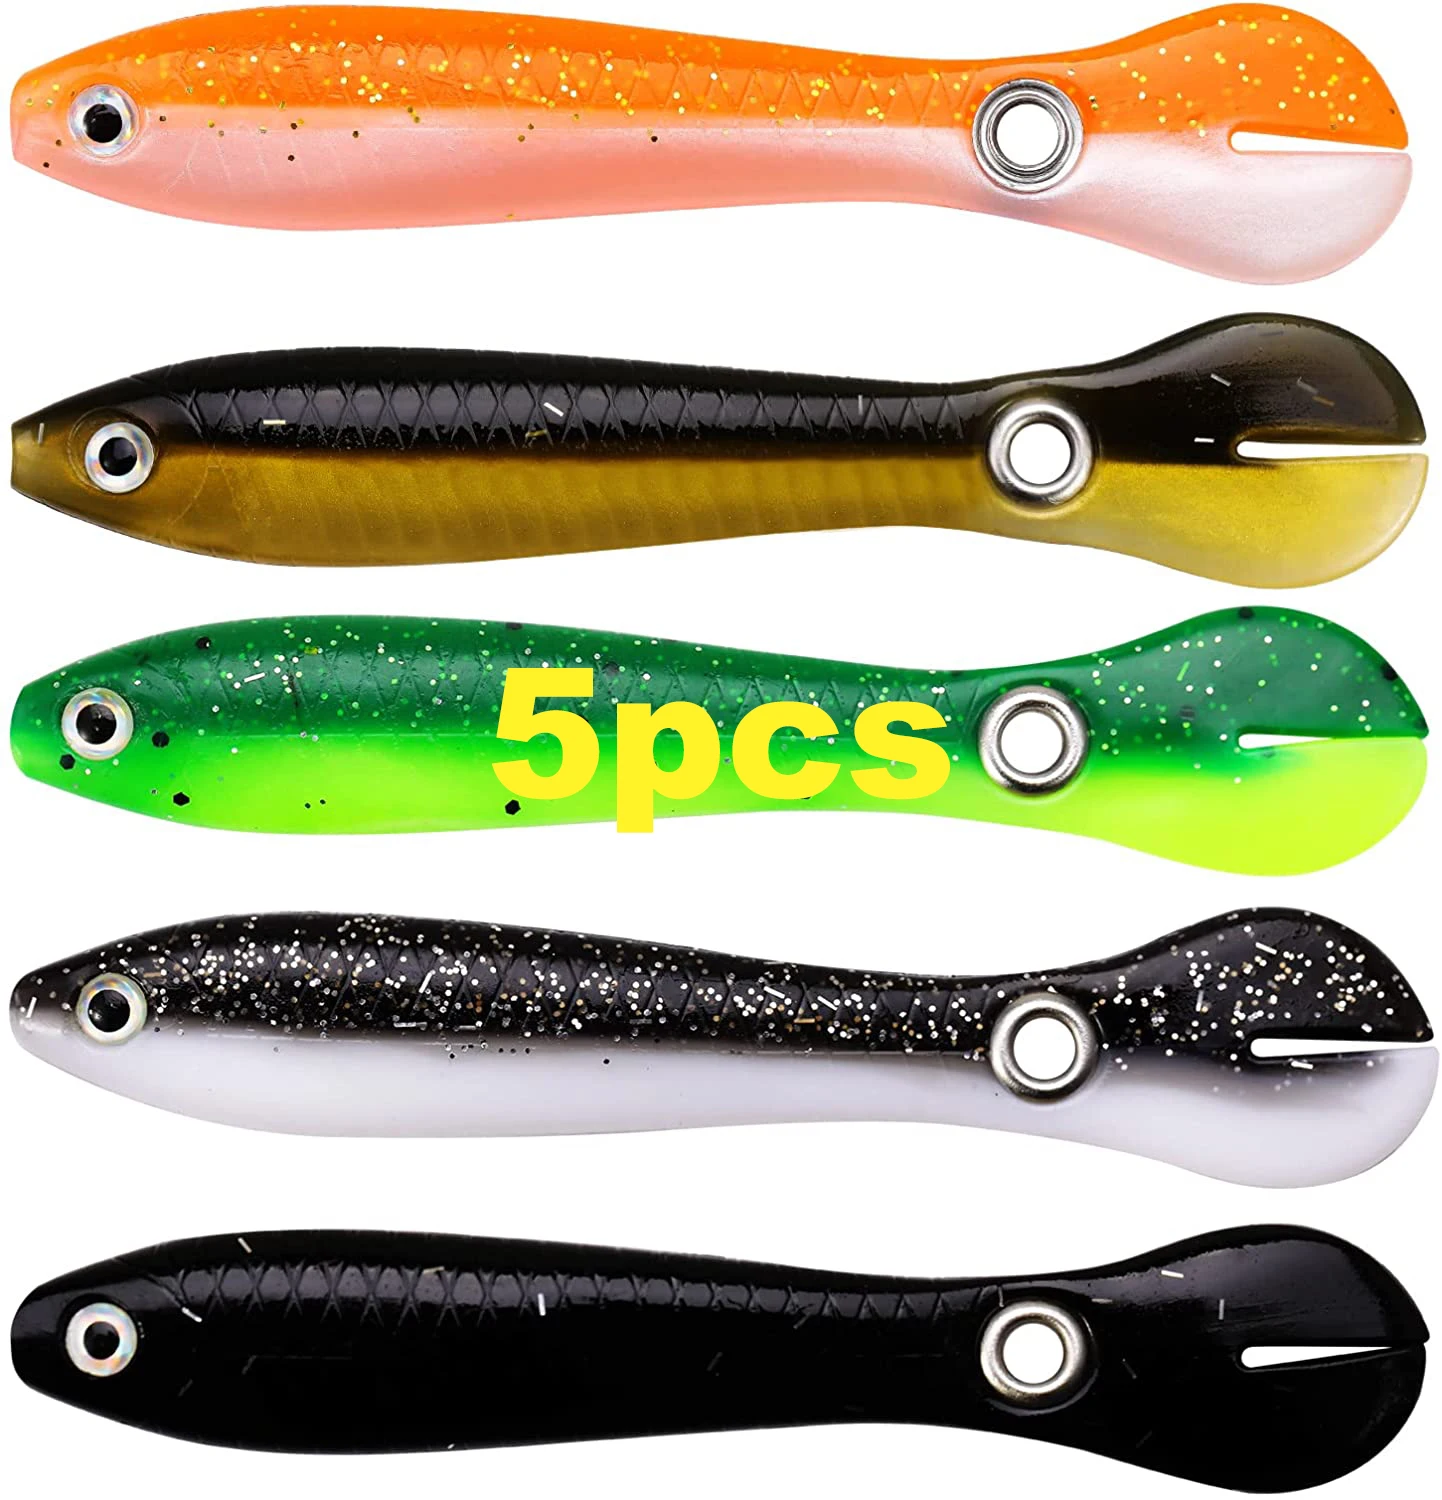 

5PCS/Lot Soft Fishing Bait 2g/6g Wobble Tail Lure Silicone Small Loach Bait Artificial Baits For Bass Pike Fishing Pesca